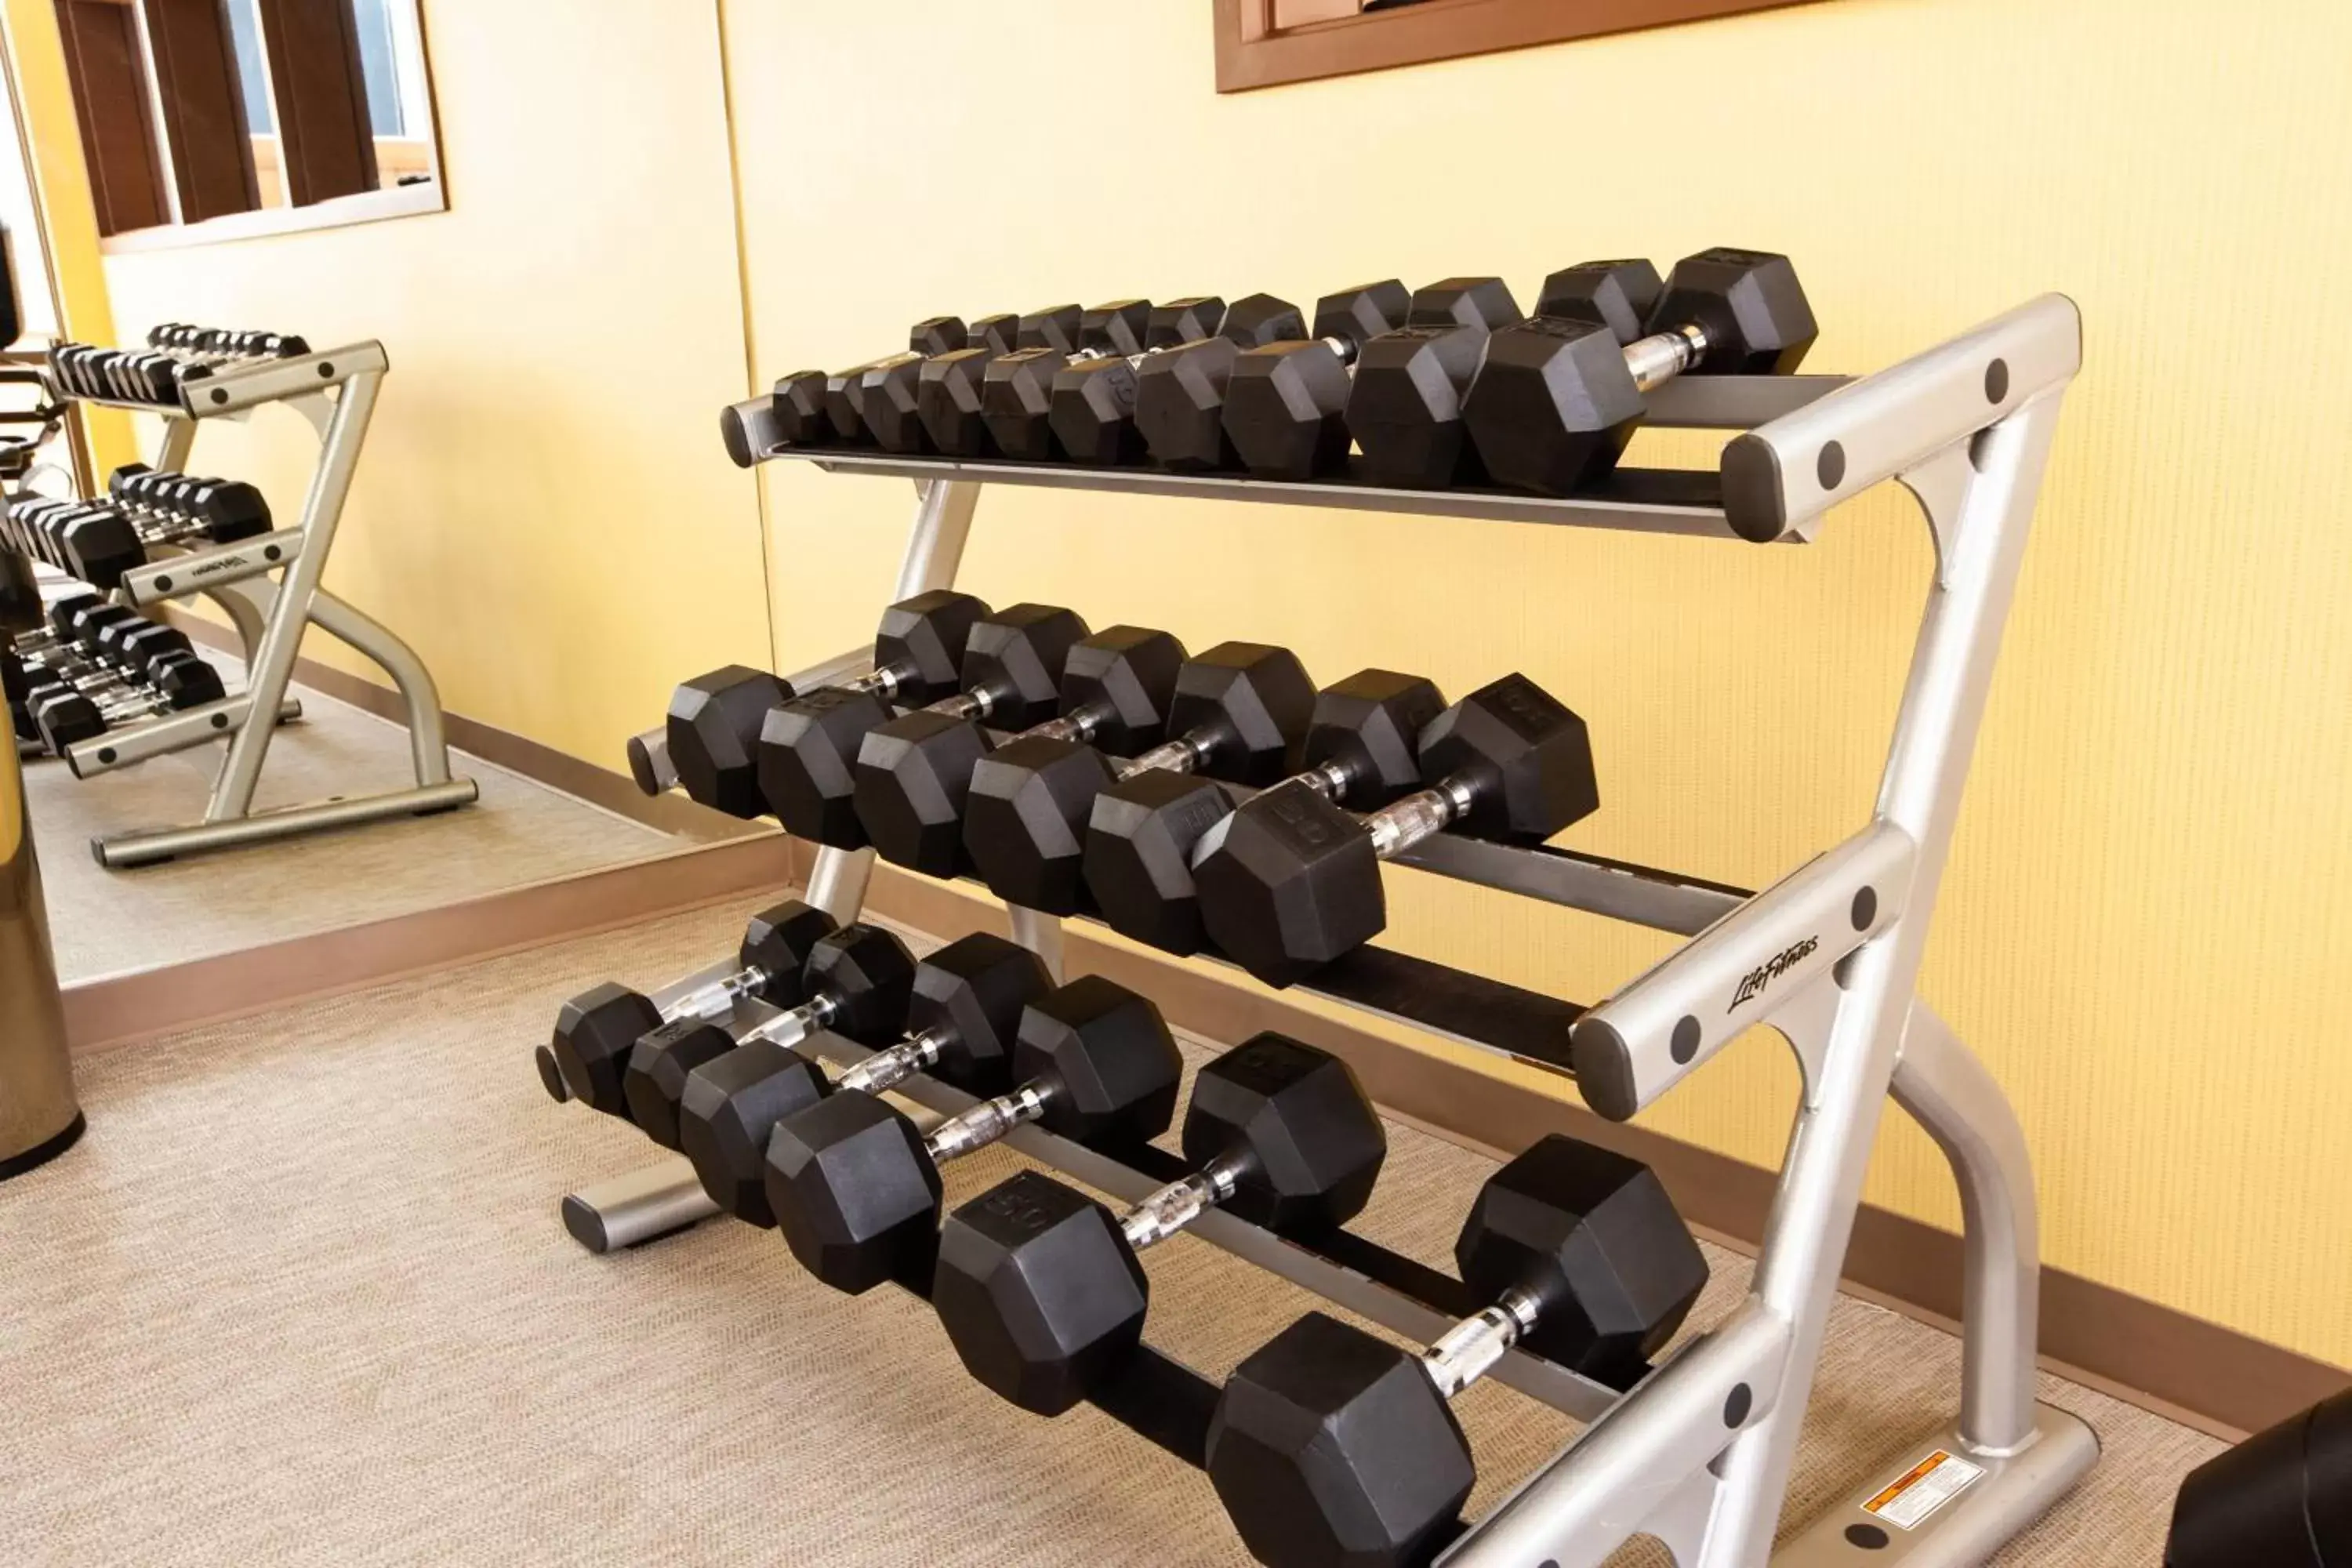 Fitness centre/facilities, Fitness Center/Facilities in SpringHill Suites Wenatchee